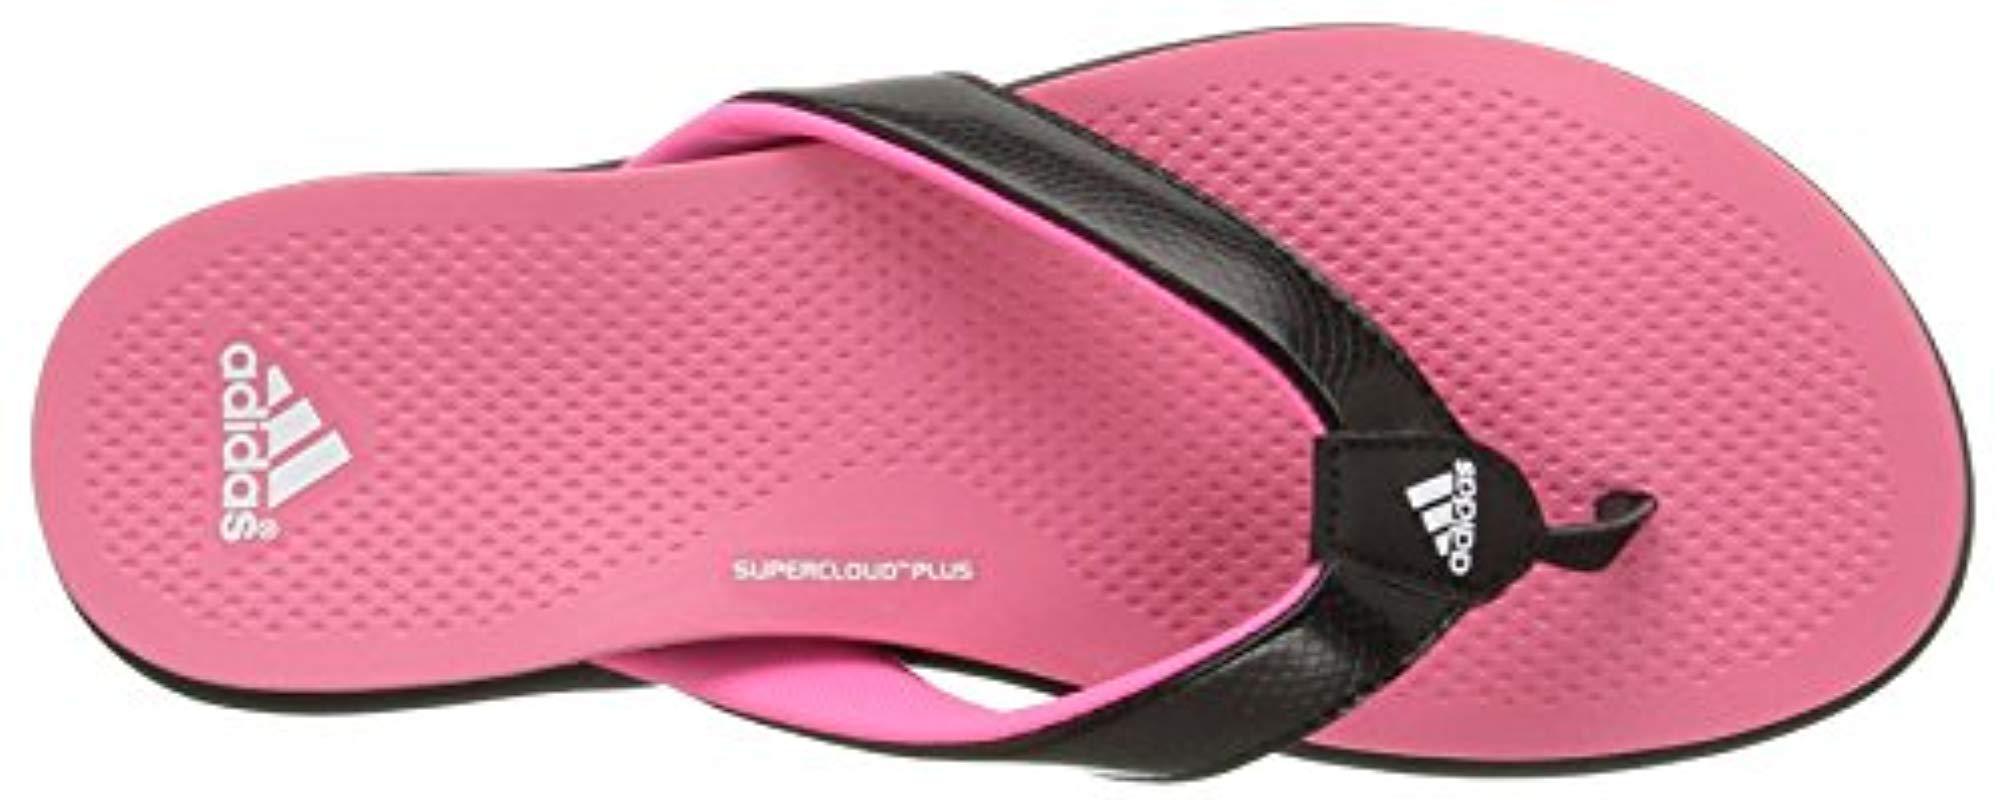 adidas Supercloud Plus Thong Athletic Running Shoe in Pink | Lyst